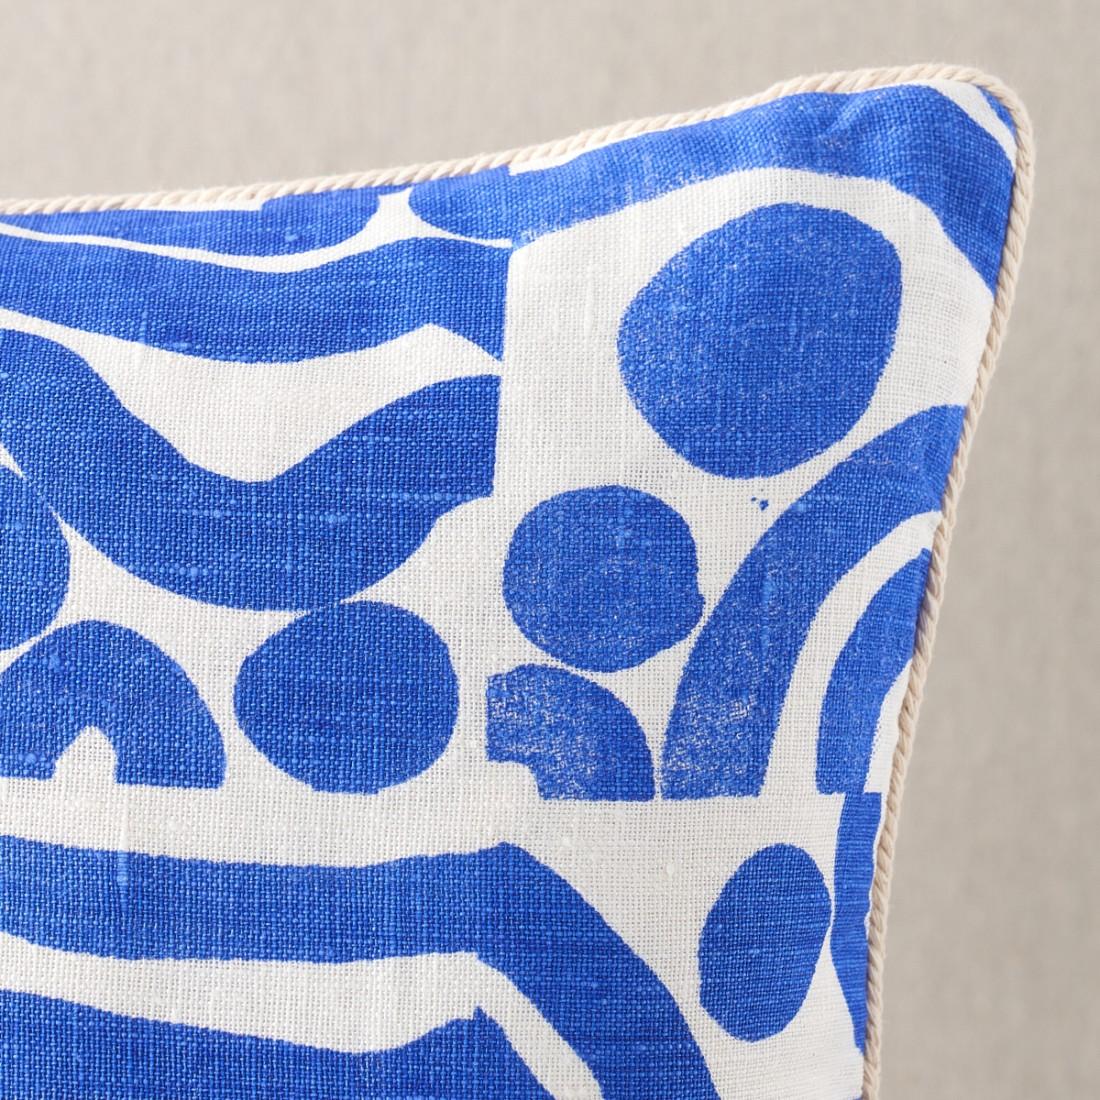 The Ocean Blue lumbar pillow features original artwork by Bonnie Ashley of Bonnie & Neal, printed on white linen. The reverse of the cushion features the same design printed on oat linen. The pillow is finished with white cord and includes a plush